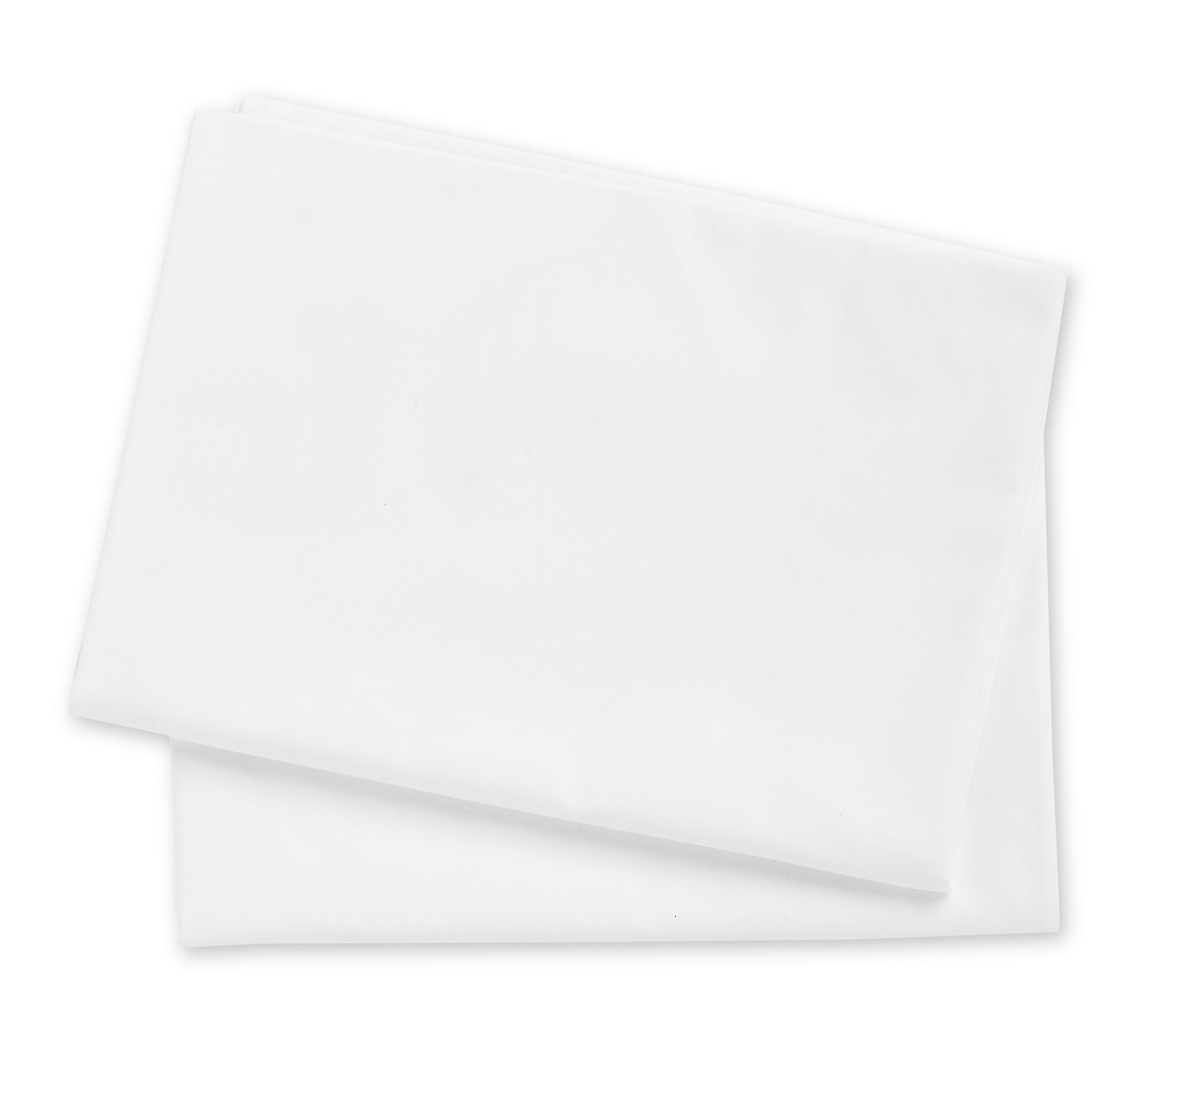 Mothercare | Mothercare White Cotton-Rich Fitted Cot Bed Sheets Pack of 2 White 0